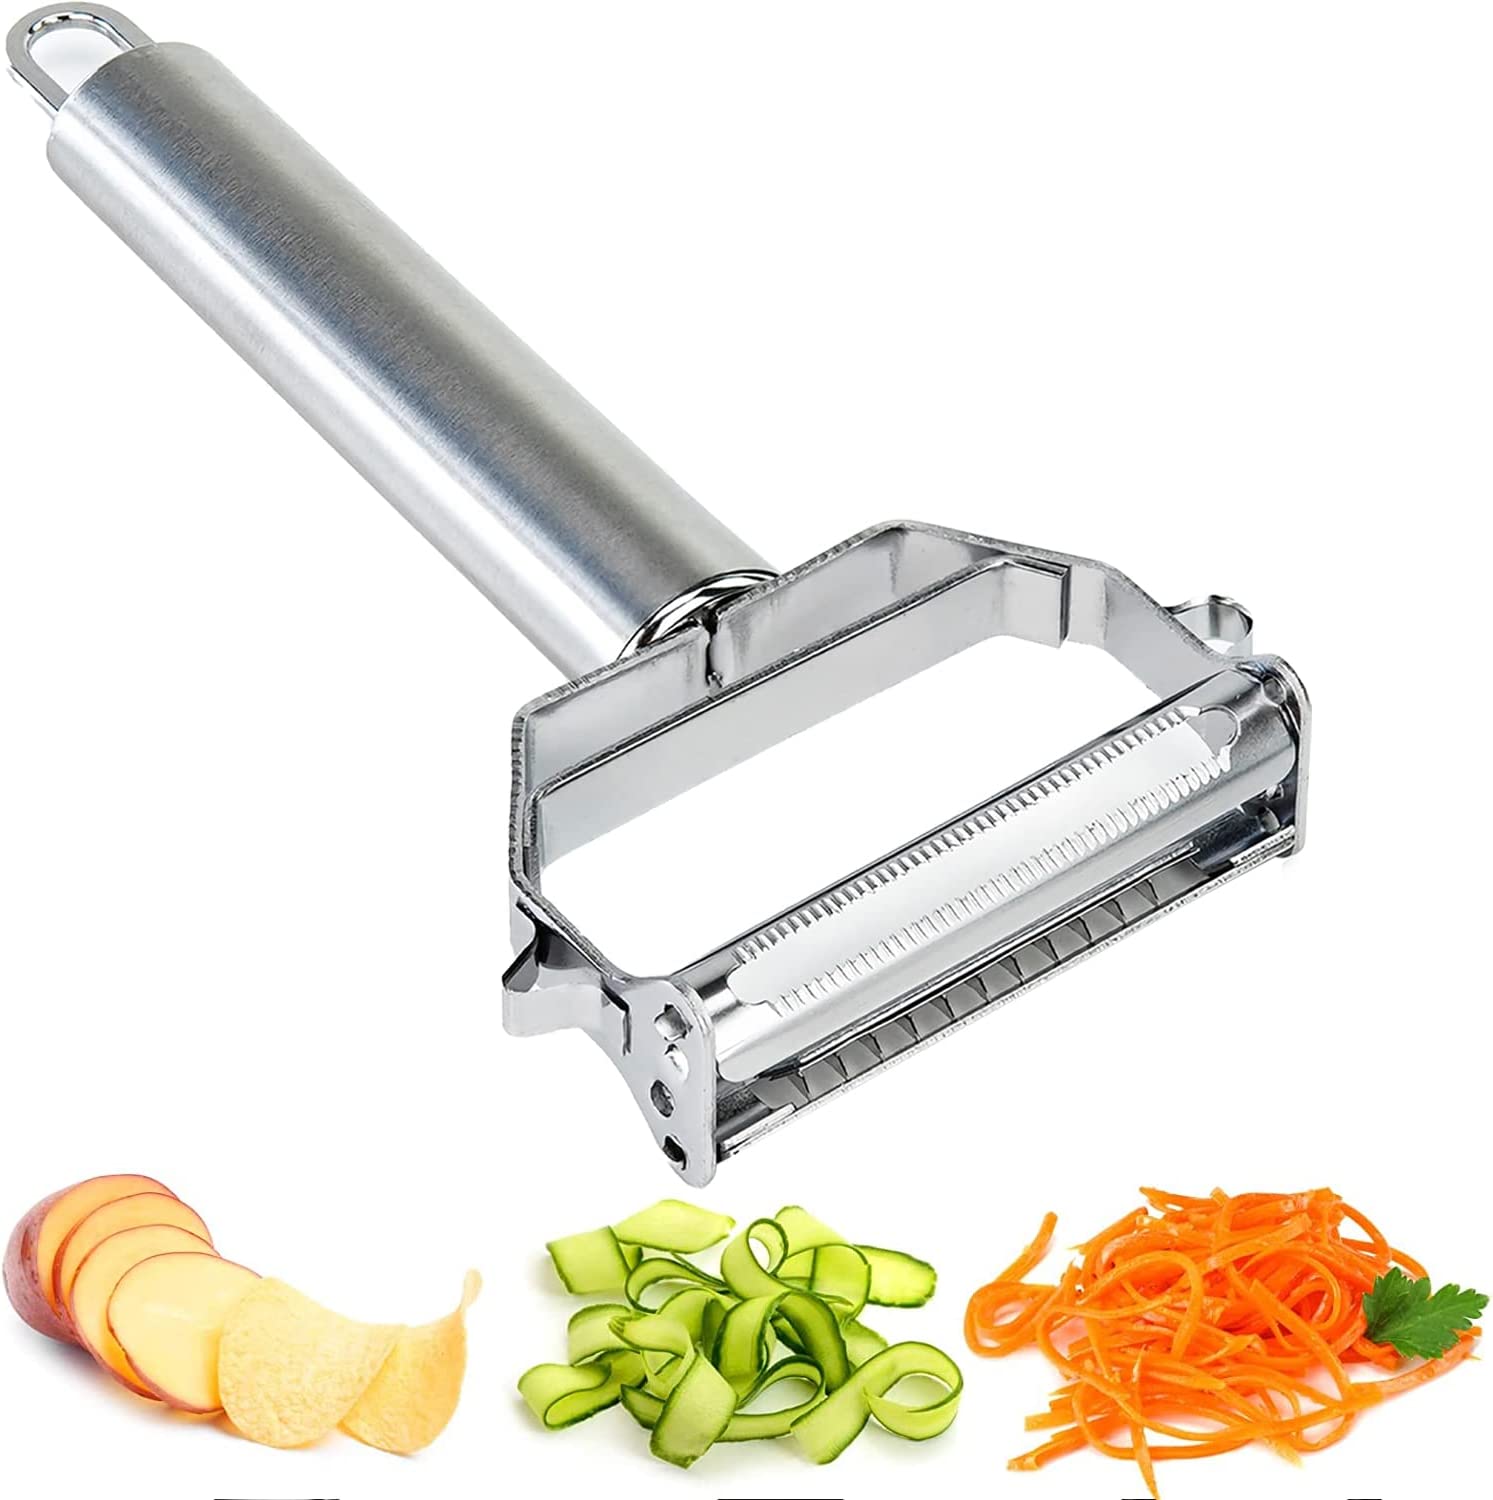  4in1 Multifunctional Grater Stainless Steel,Multifunction  Vegetable Cabbage Slicer Grater, Handheld 4 Adjustable Blades Sets Shredder  Cutter Slicer with Hand Protector, for Cheese,Lemon,Chocolate: Home &  Kitchen